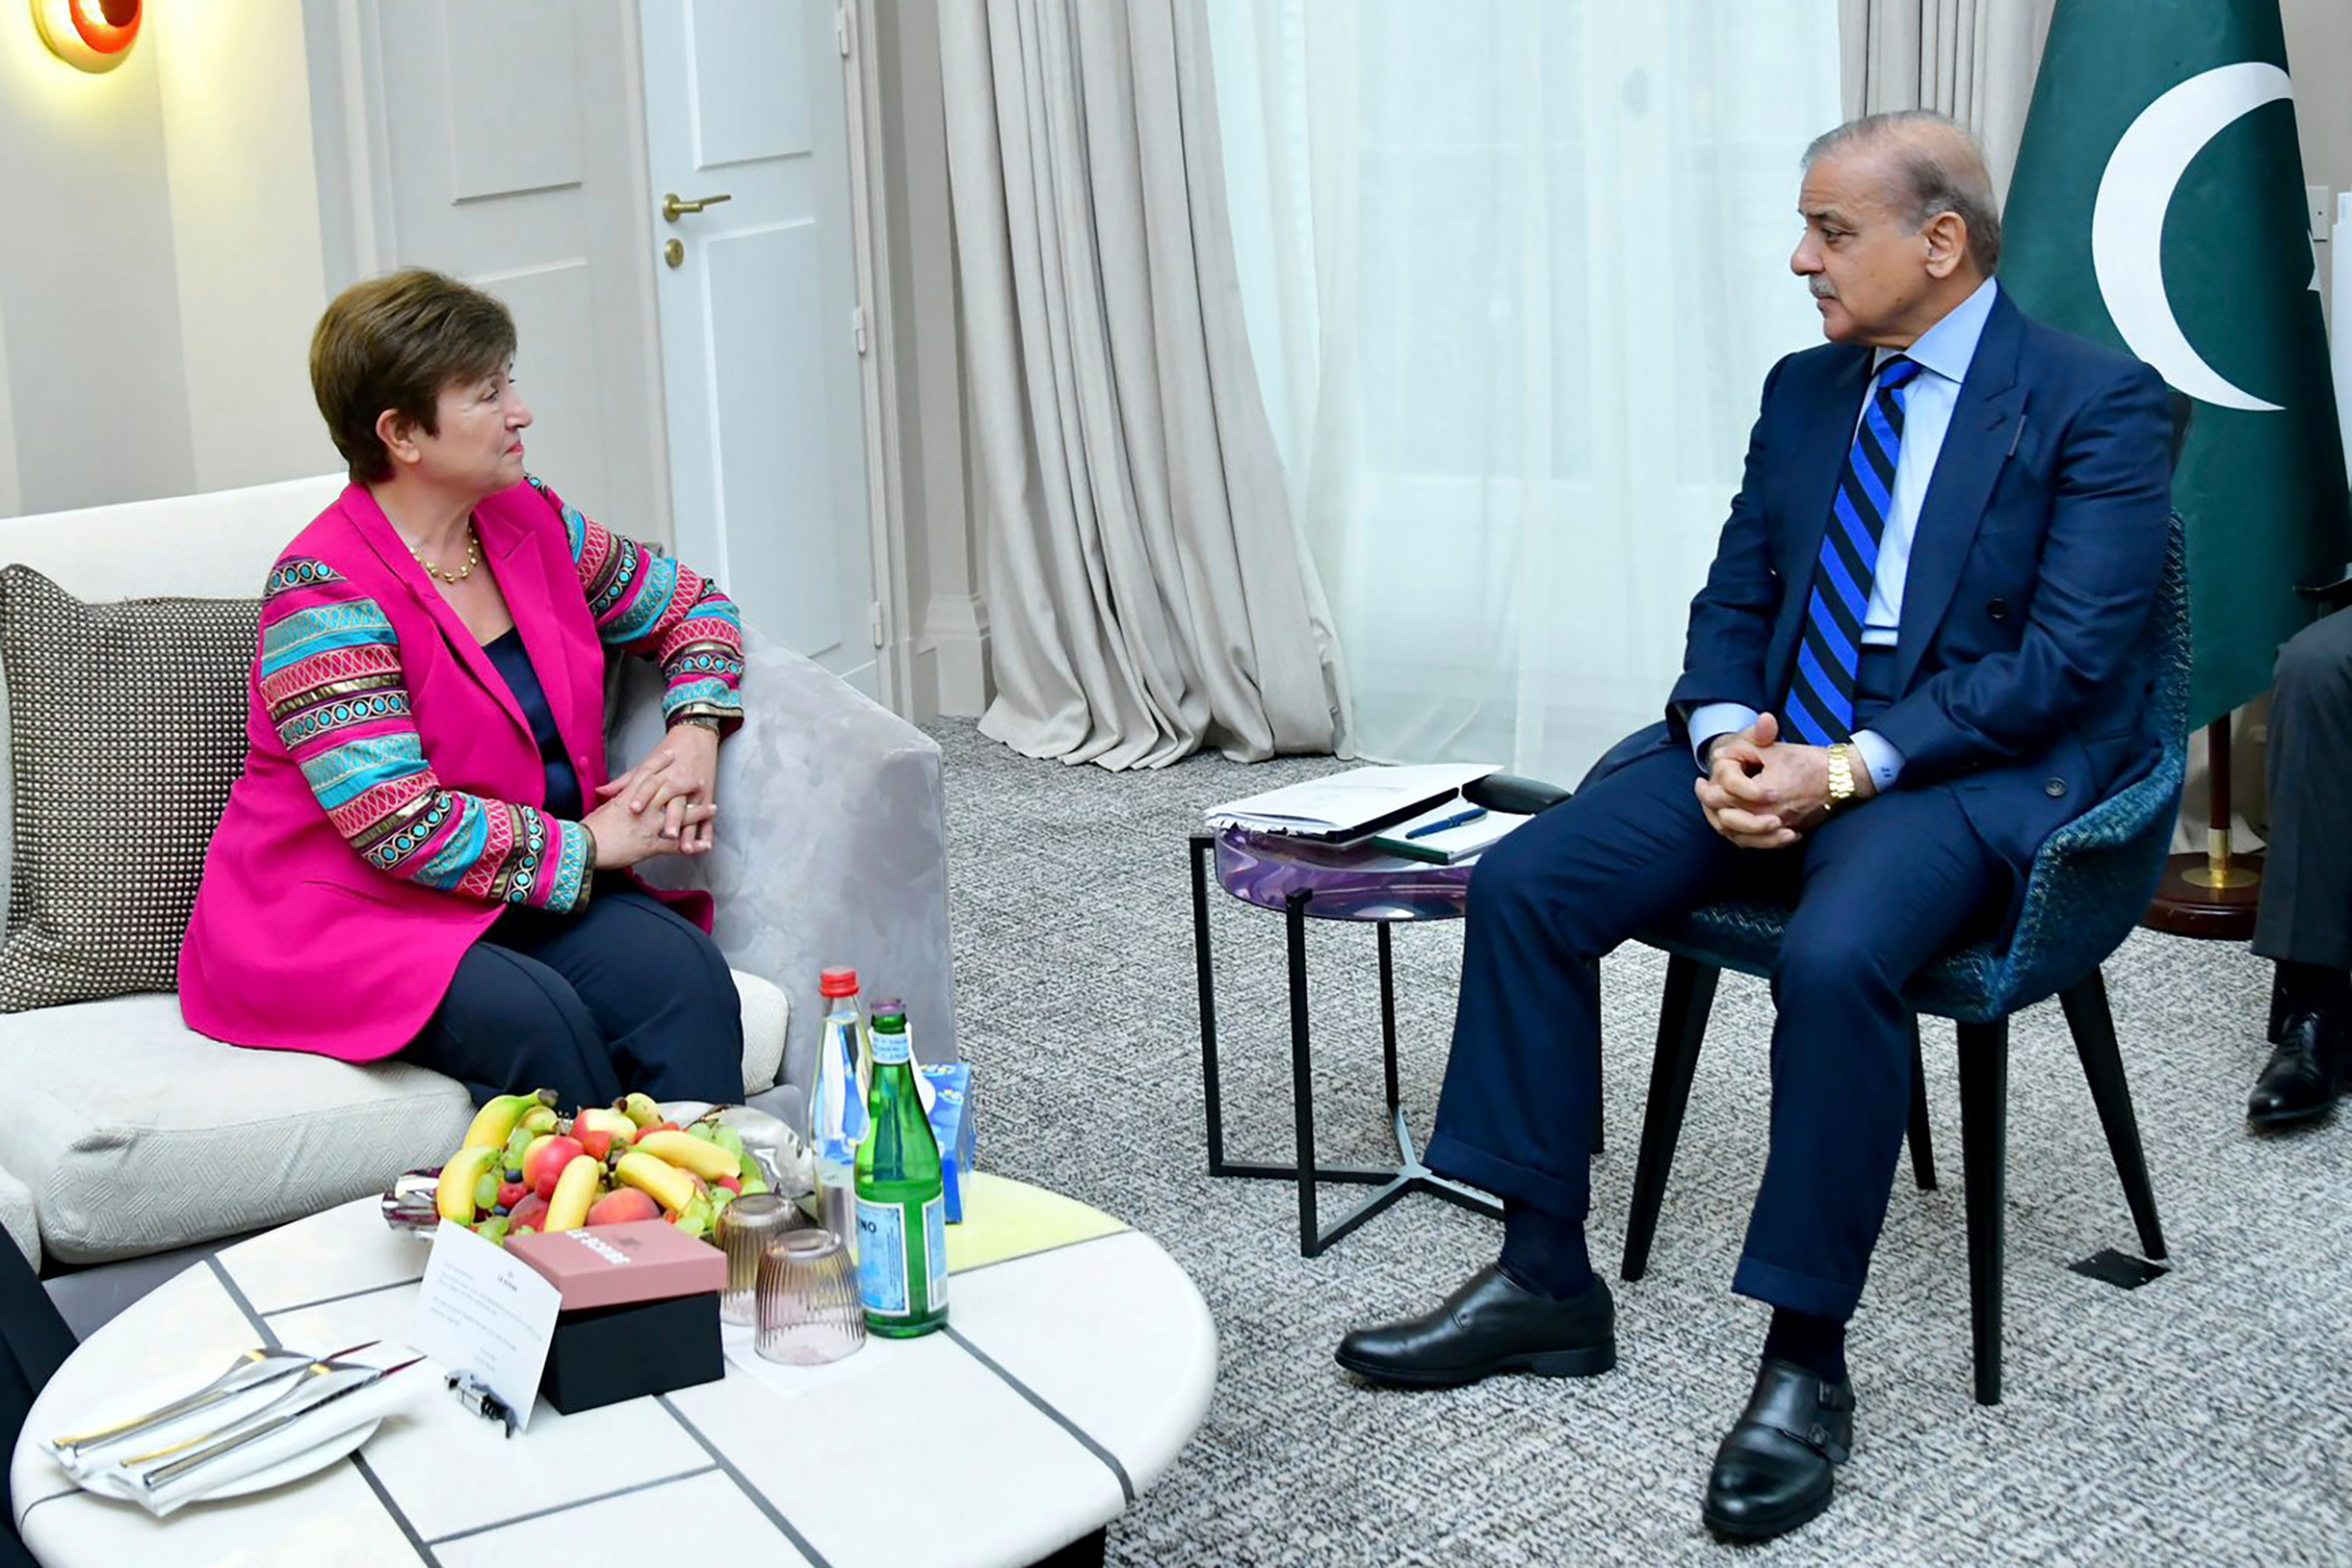 Prime Minister Shahbaz Sharif, right, meets with International Monetary Fund's Managing Director Kristalina Georgieva in Paris, France, on June 22, hoping to unlock a $6 billion bailout and gain the release of a critical tranche of $1.1 billion in loans which has been on hold since November.